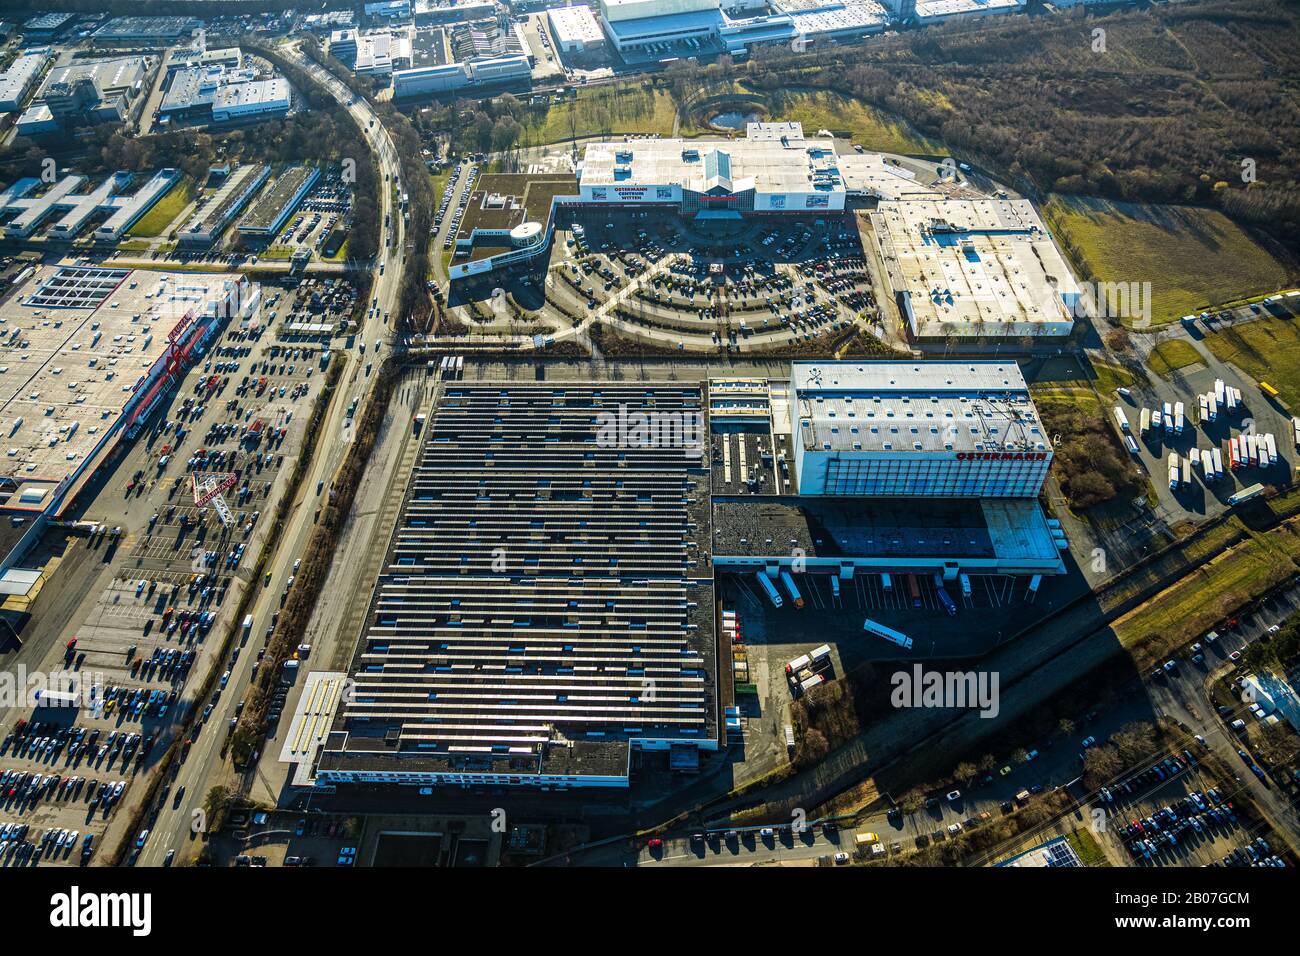 Aerial photo, Ostermann furniture store, commercial area at Brauckstraße, Rüdinghausen, Witten, Ennepe-Ruhr district, Ruhr area, North Rhine-Westphali Stock Photo